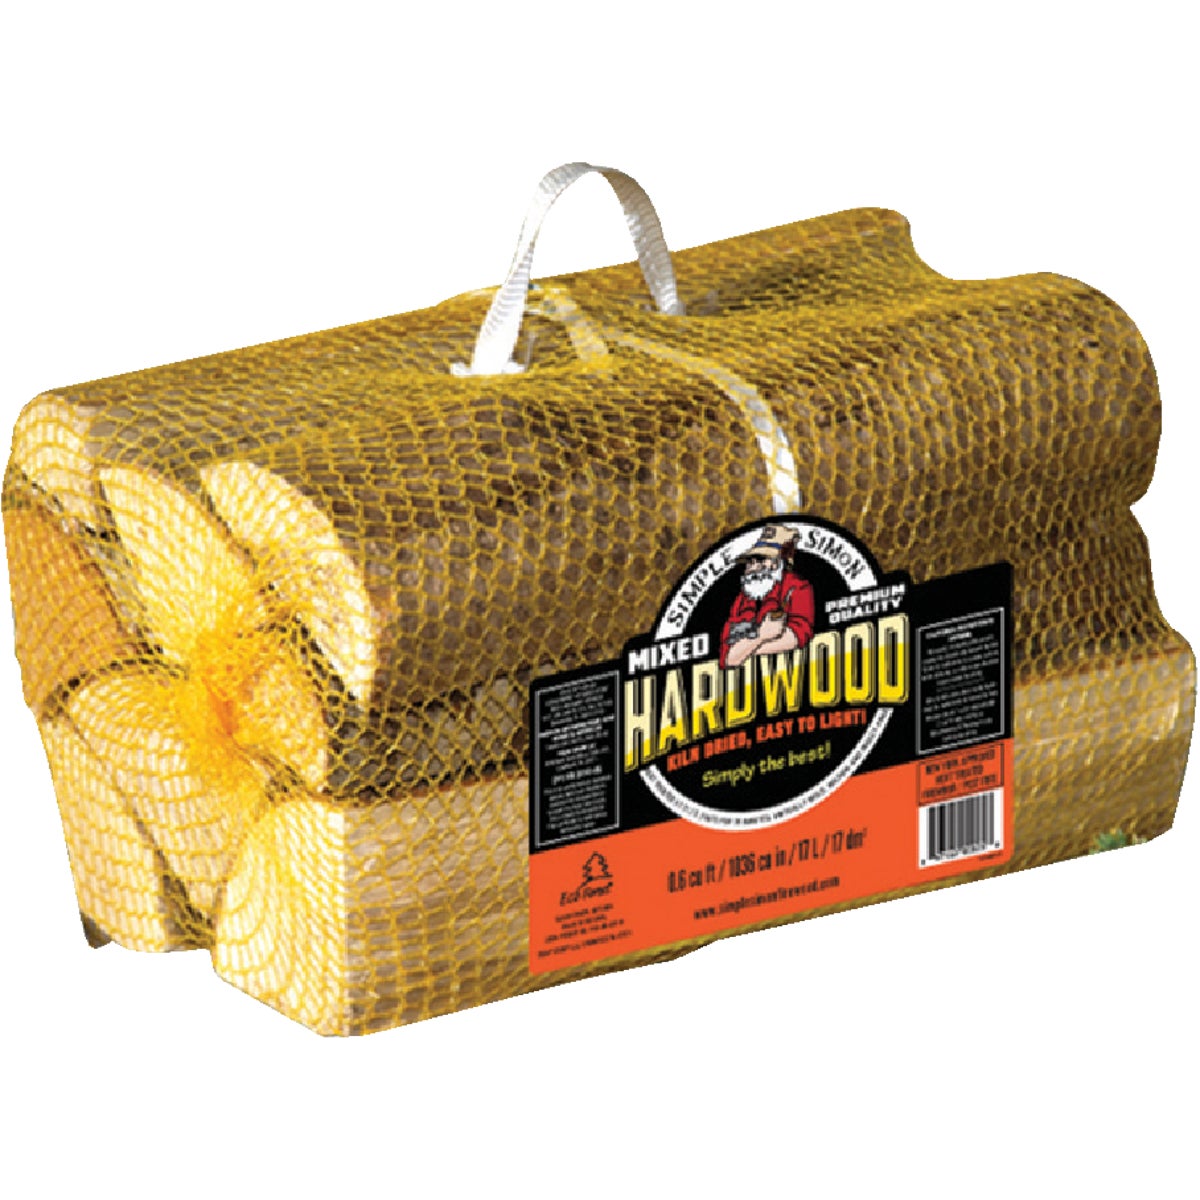 Item 404554, Premium select hardwood mix firewood lights easily and delivers a long and 